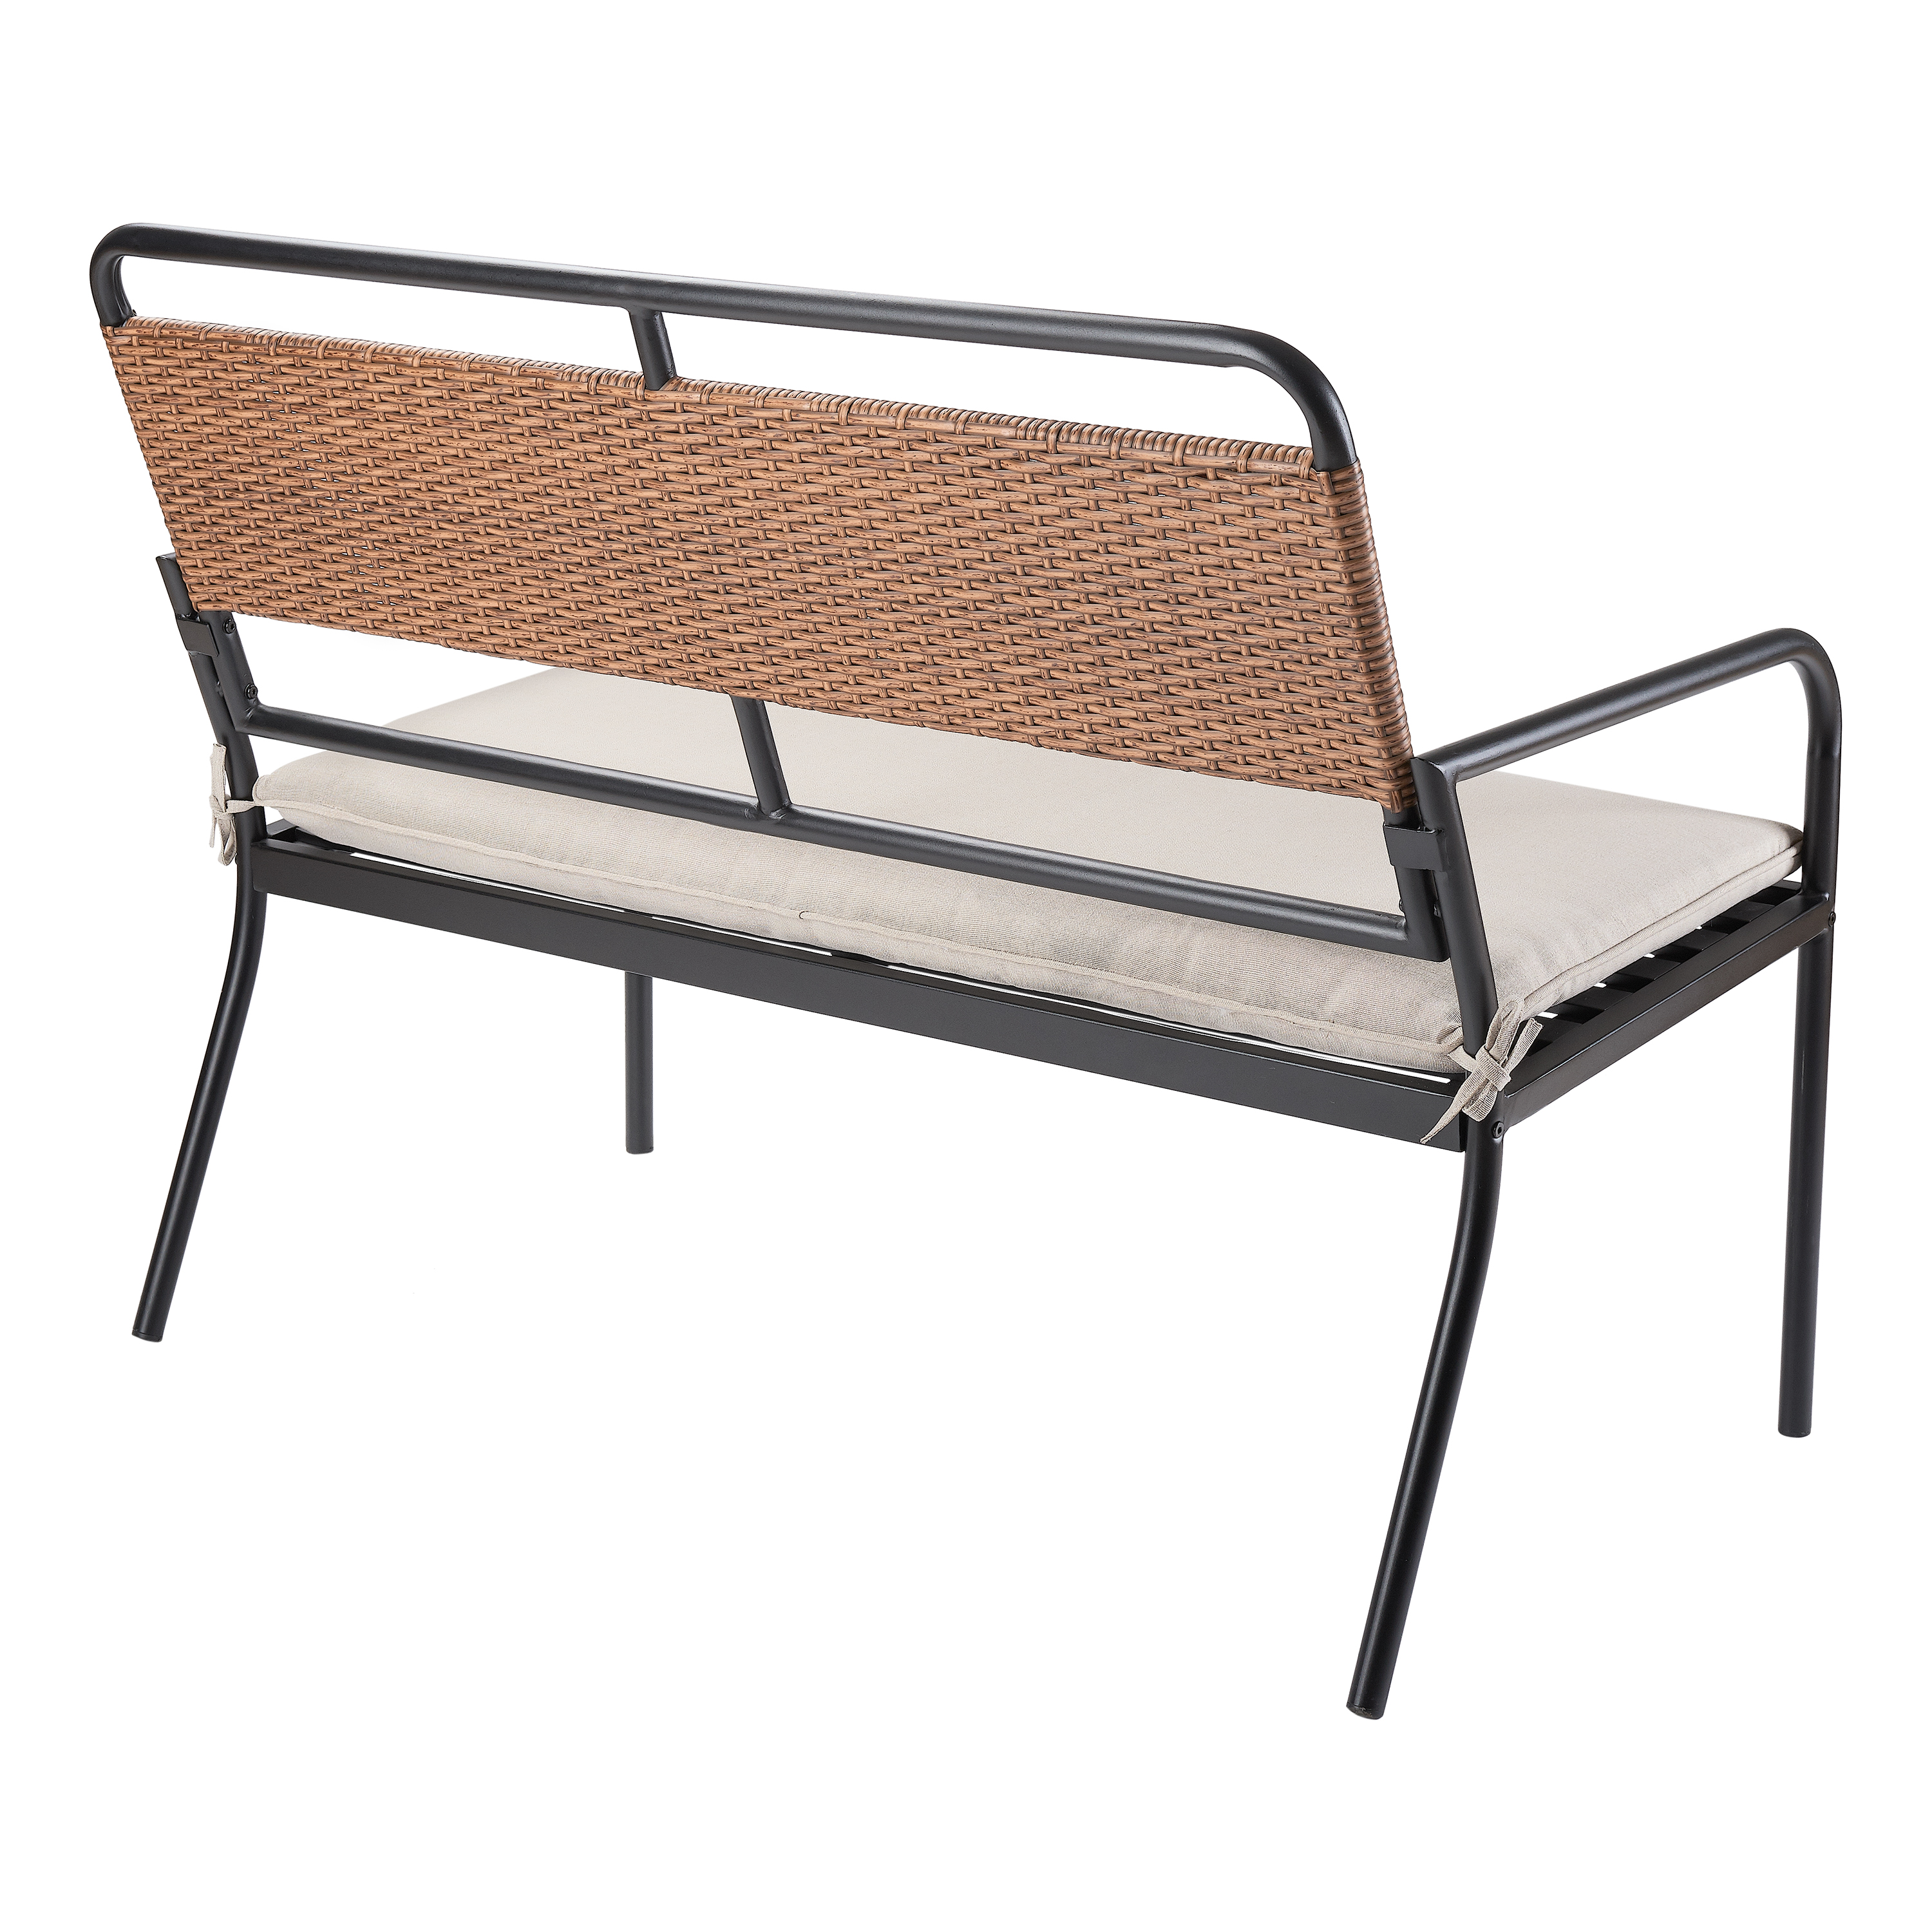 Mainstays Holcomb Outdoor Metal and Wicker Bench - image 2 of 4